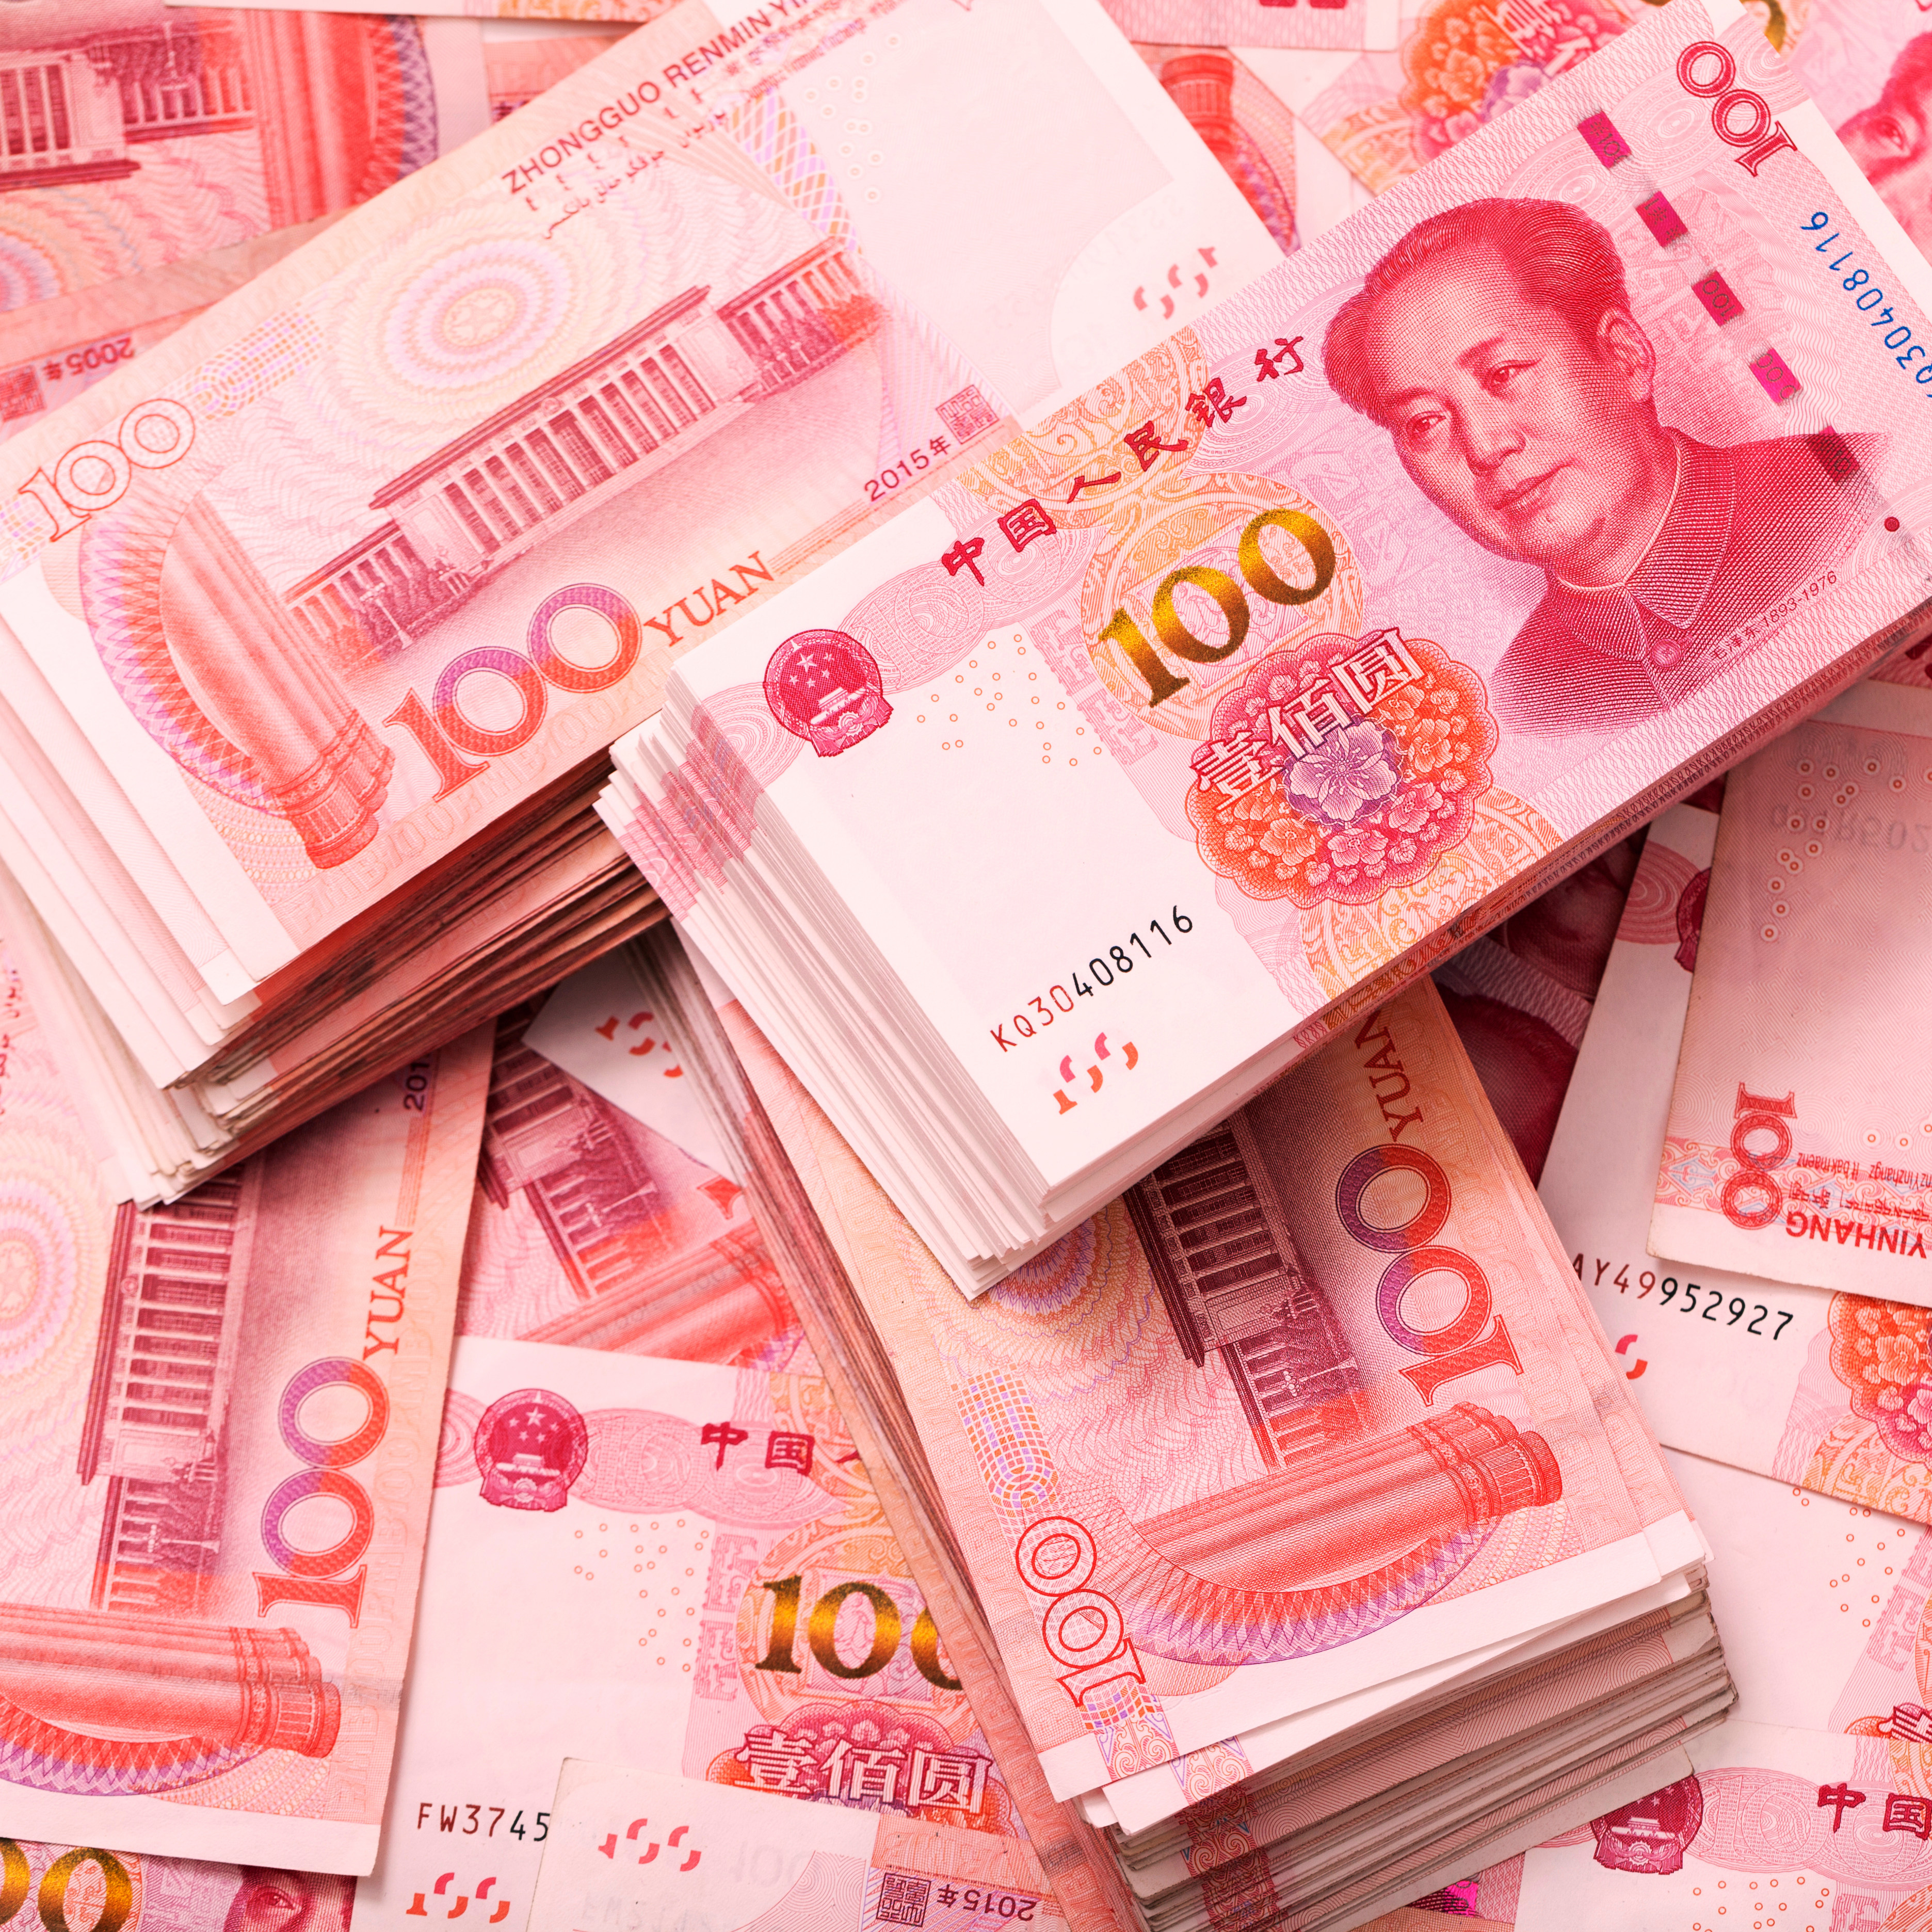 China’s new financial regulatory body under the Communist Party’s Central Committee has begun operations. Photo: Shutterstock